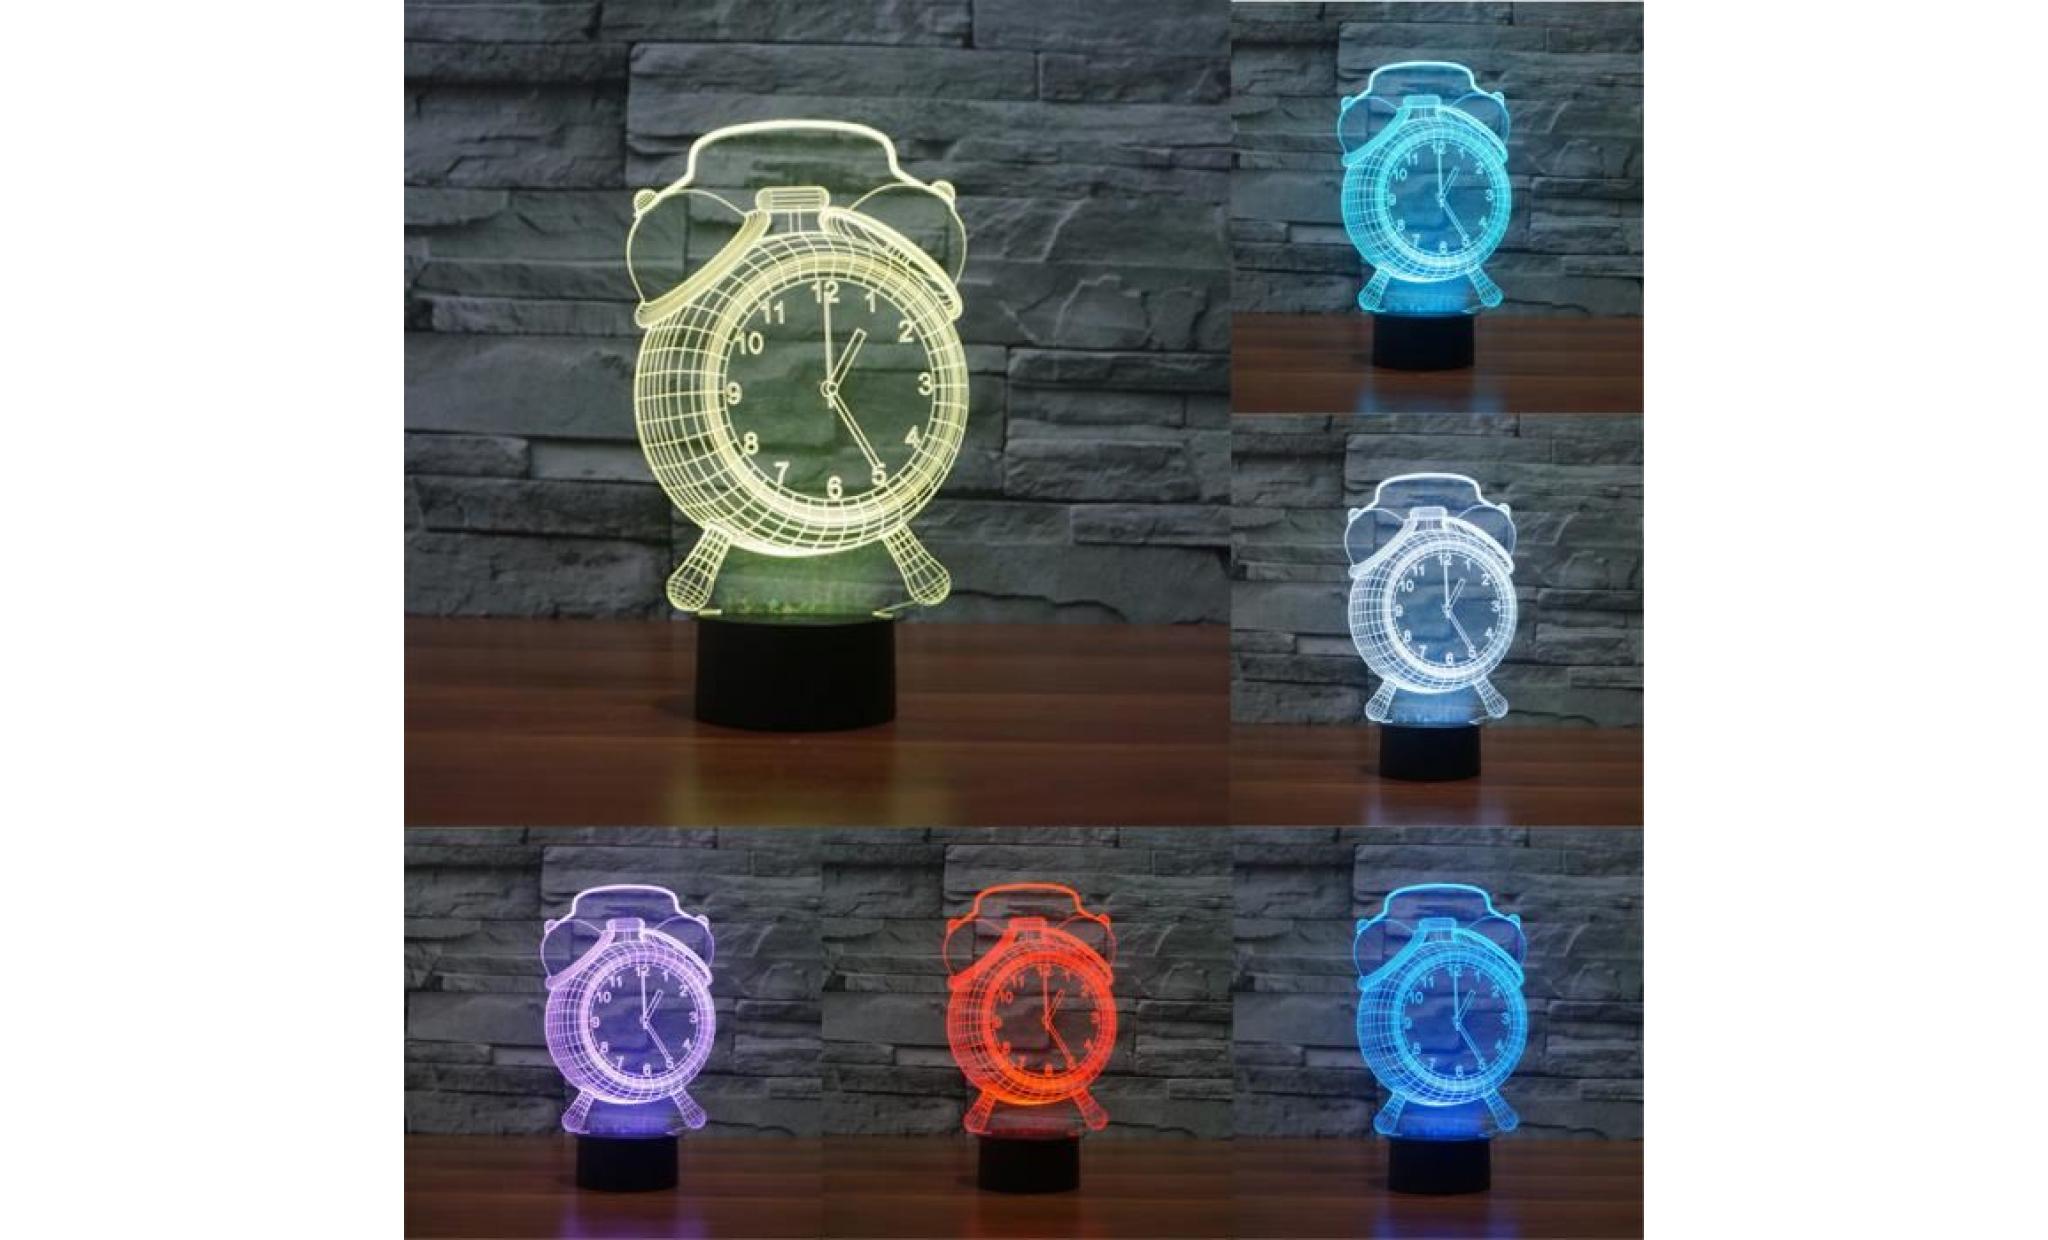 3d illusion visual night light 7 colors change led desk lamp bedroom home decor pageare2330 pageare2330